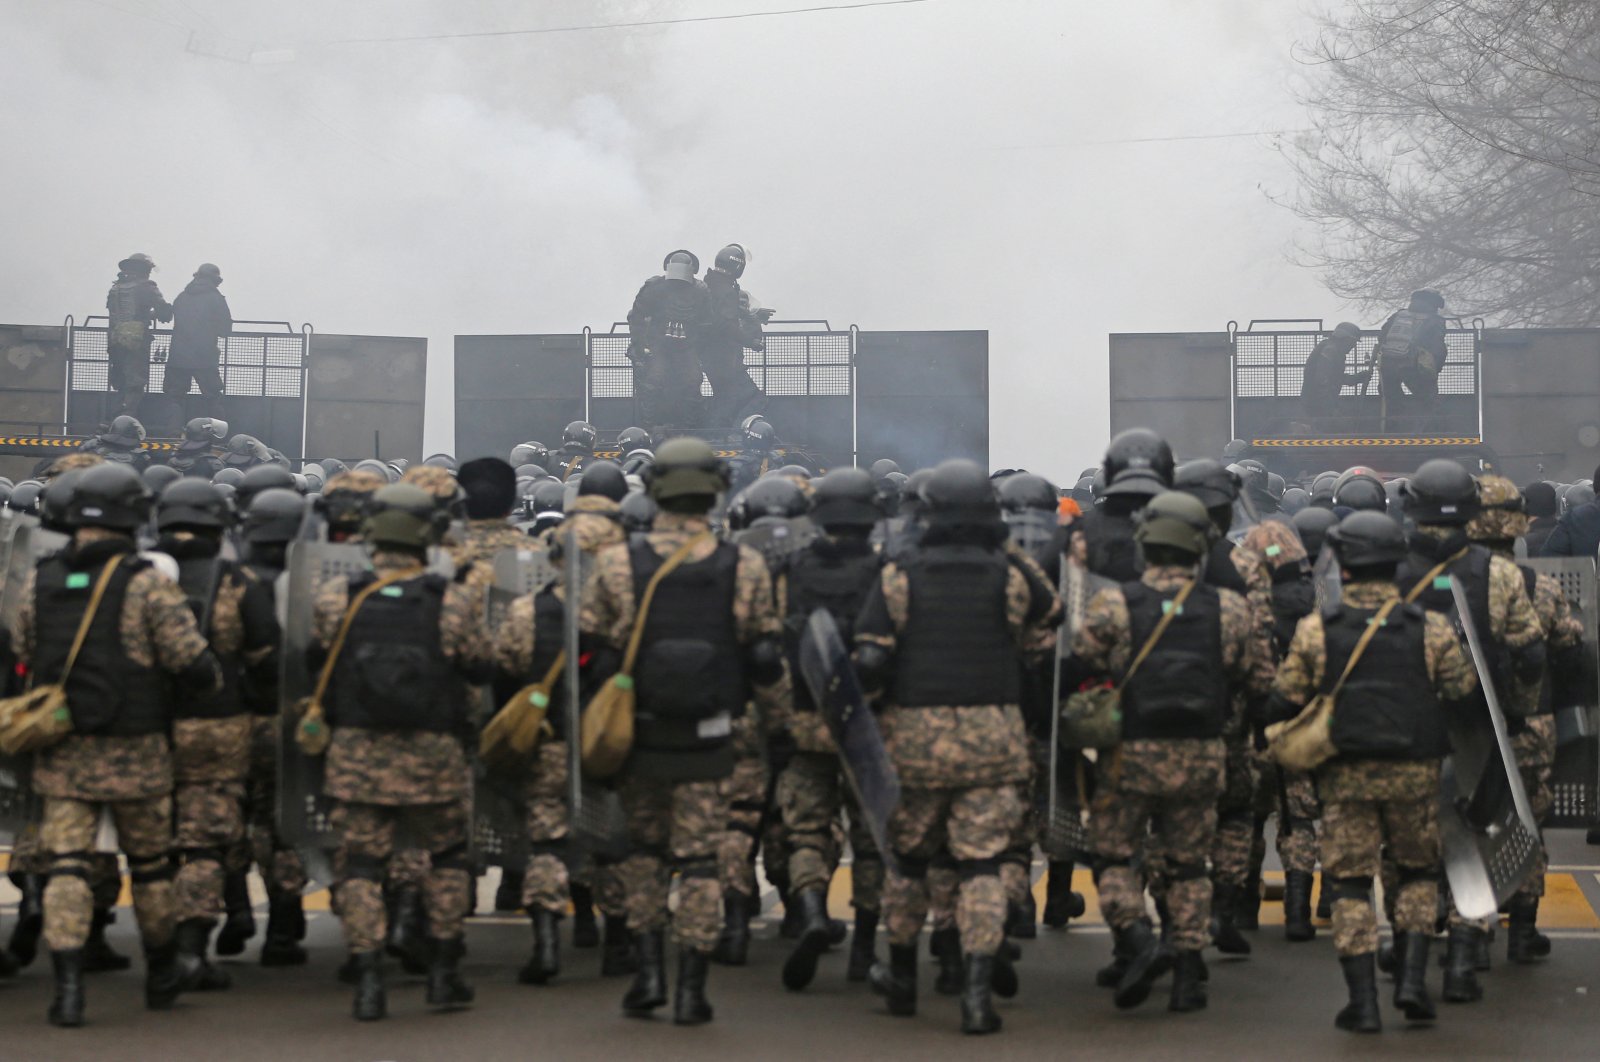 Kazakh law enforcement officers are seen on a barricade during a protest triggered by a fuel price increase in Almaty, Kazakhstan, Jan. 5, 2022. (Reuters Photo)